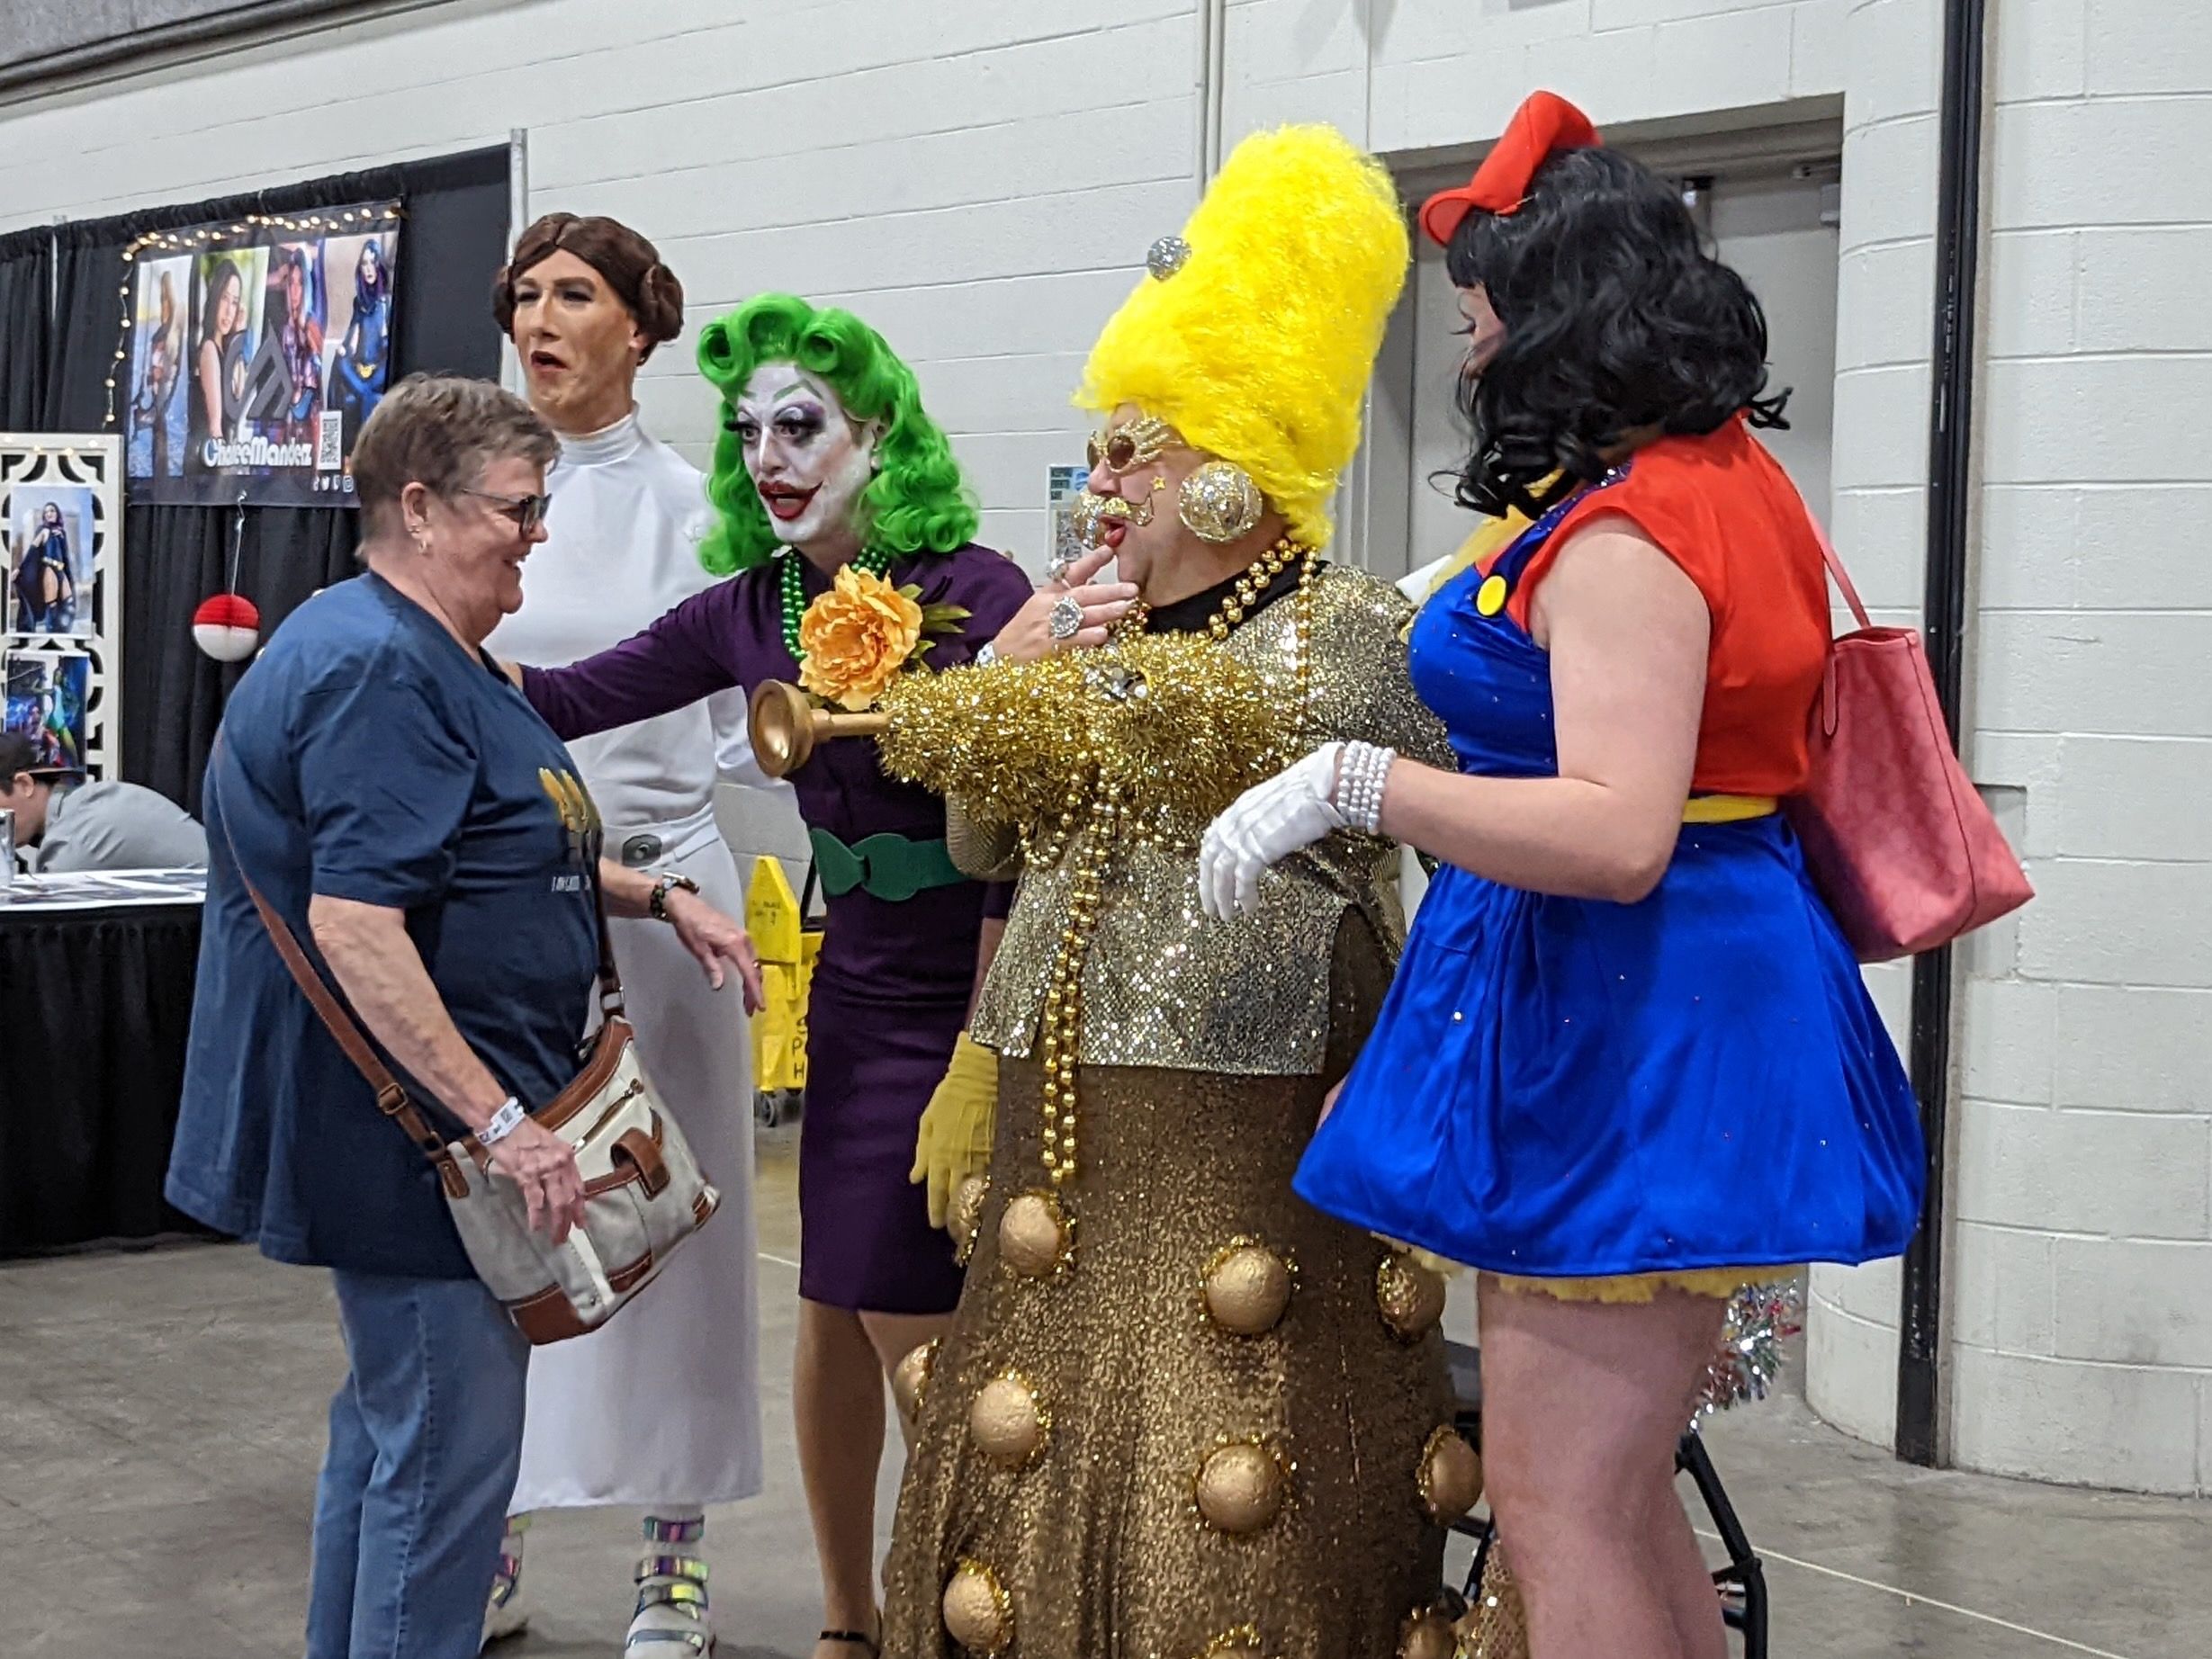 A group of men dressed in drag as Princess Leia and other queens greet a woman with hugs.